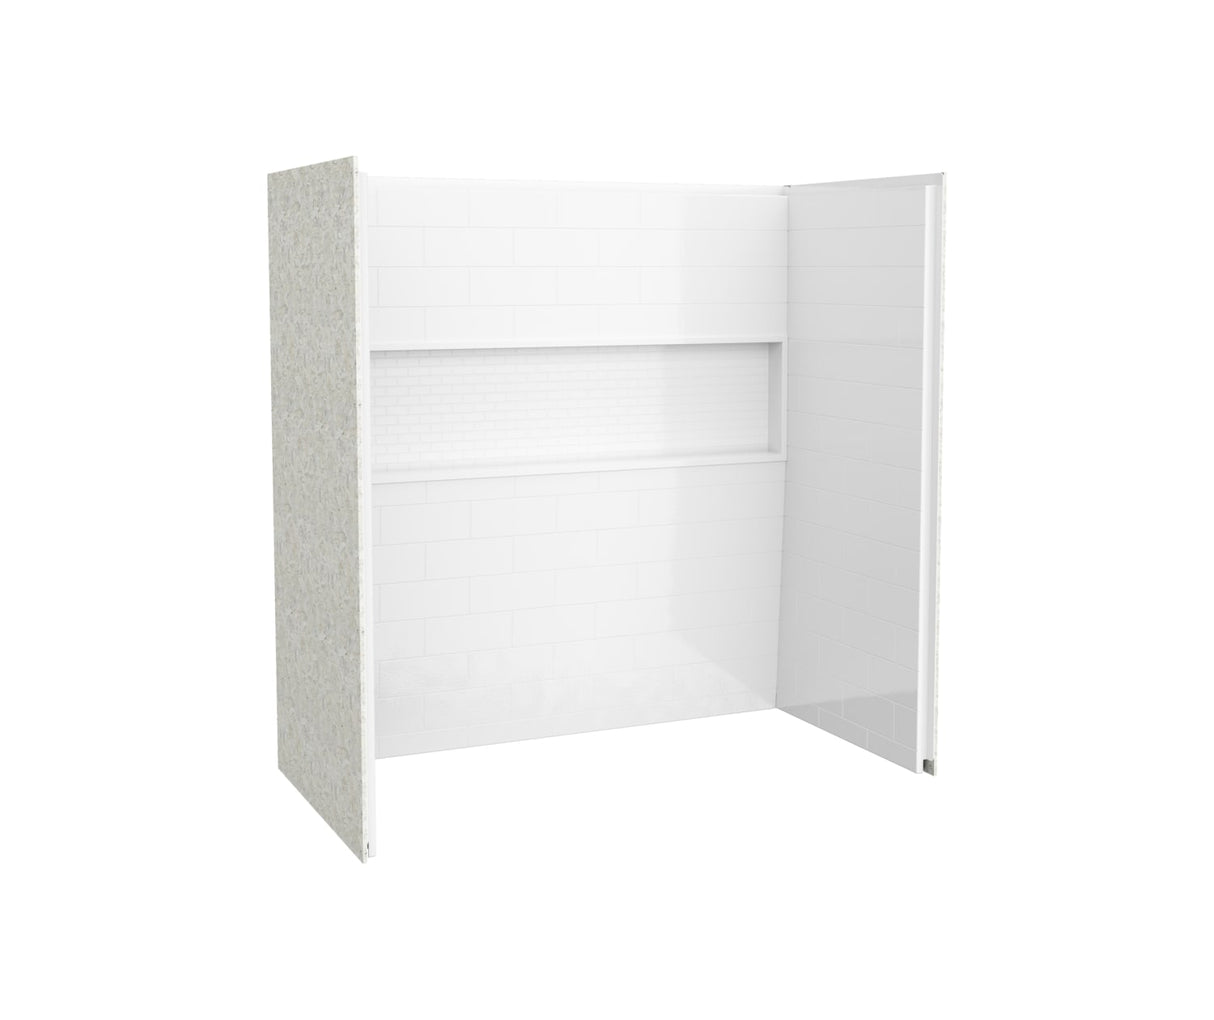 Swanstone NexTile 6030 Direct-to-Stud Four-Piece Alcove Tub Wall Kit in White SE6030TS.010